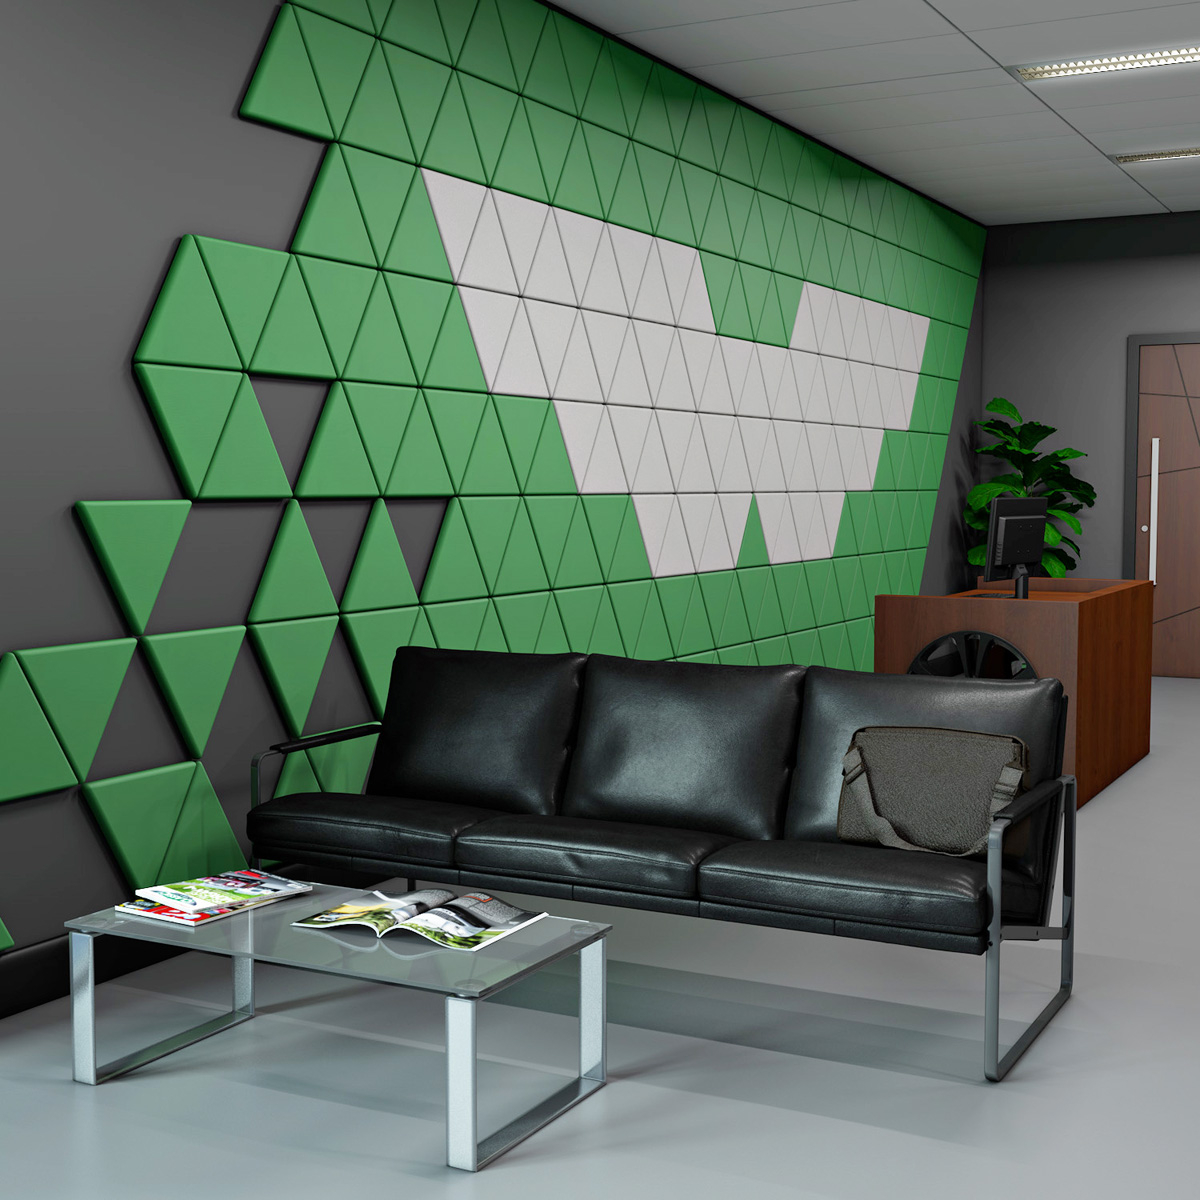 VIRAGE<sup>™</sup> Triangular Acoustic Wall Soundproofing Panels